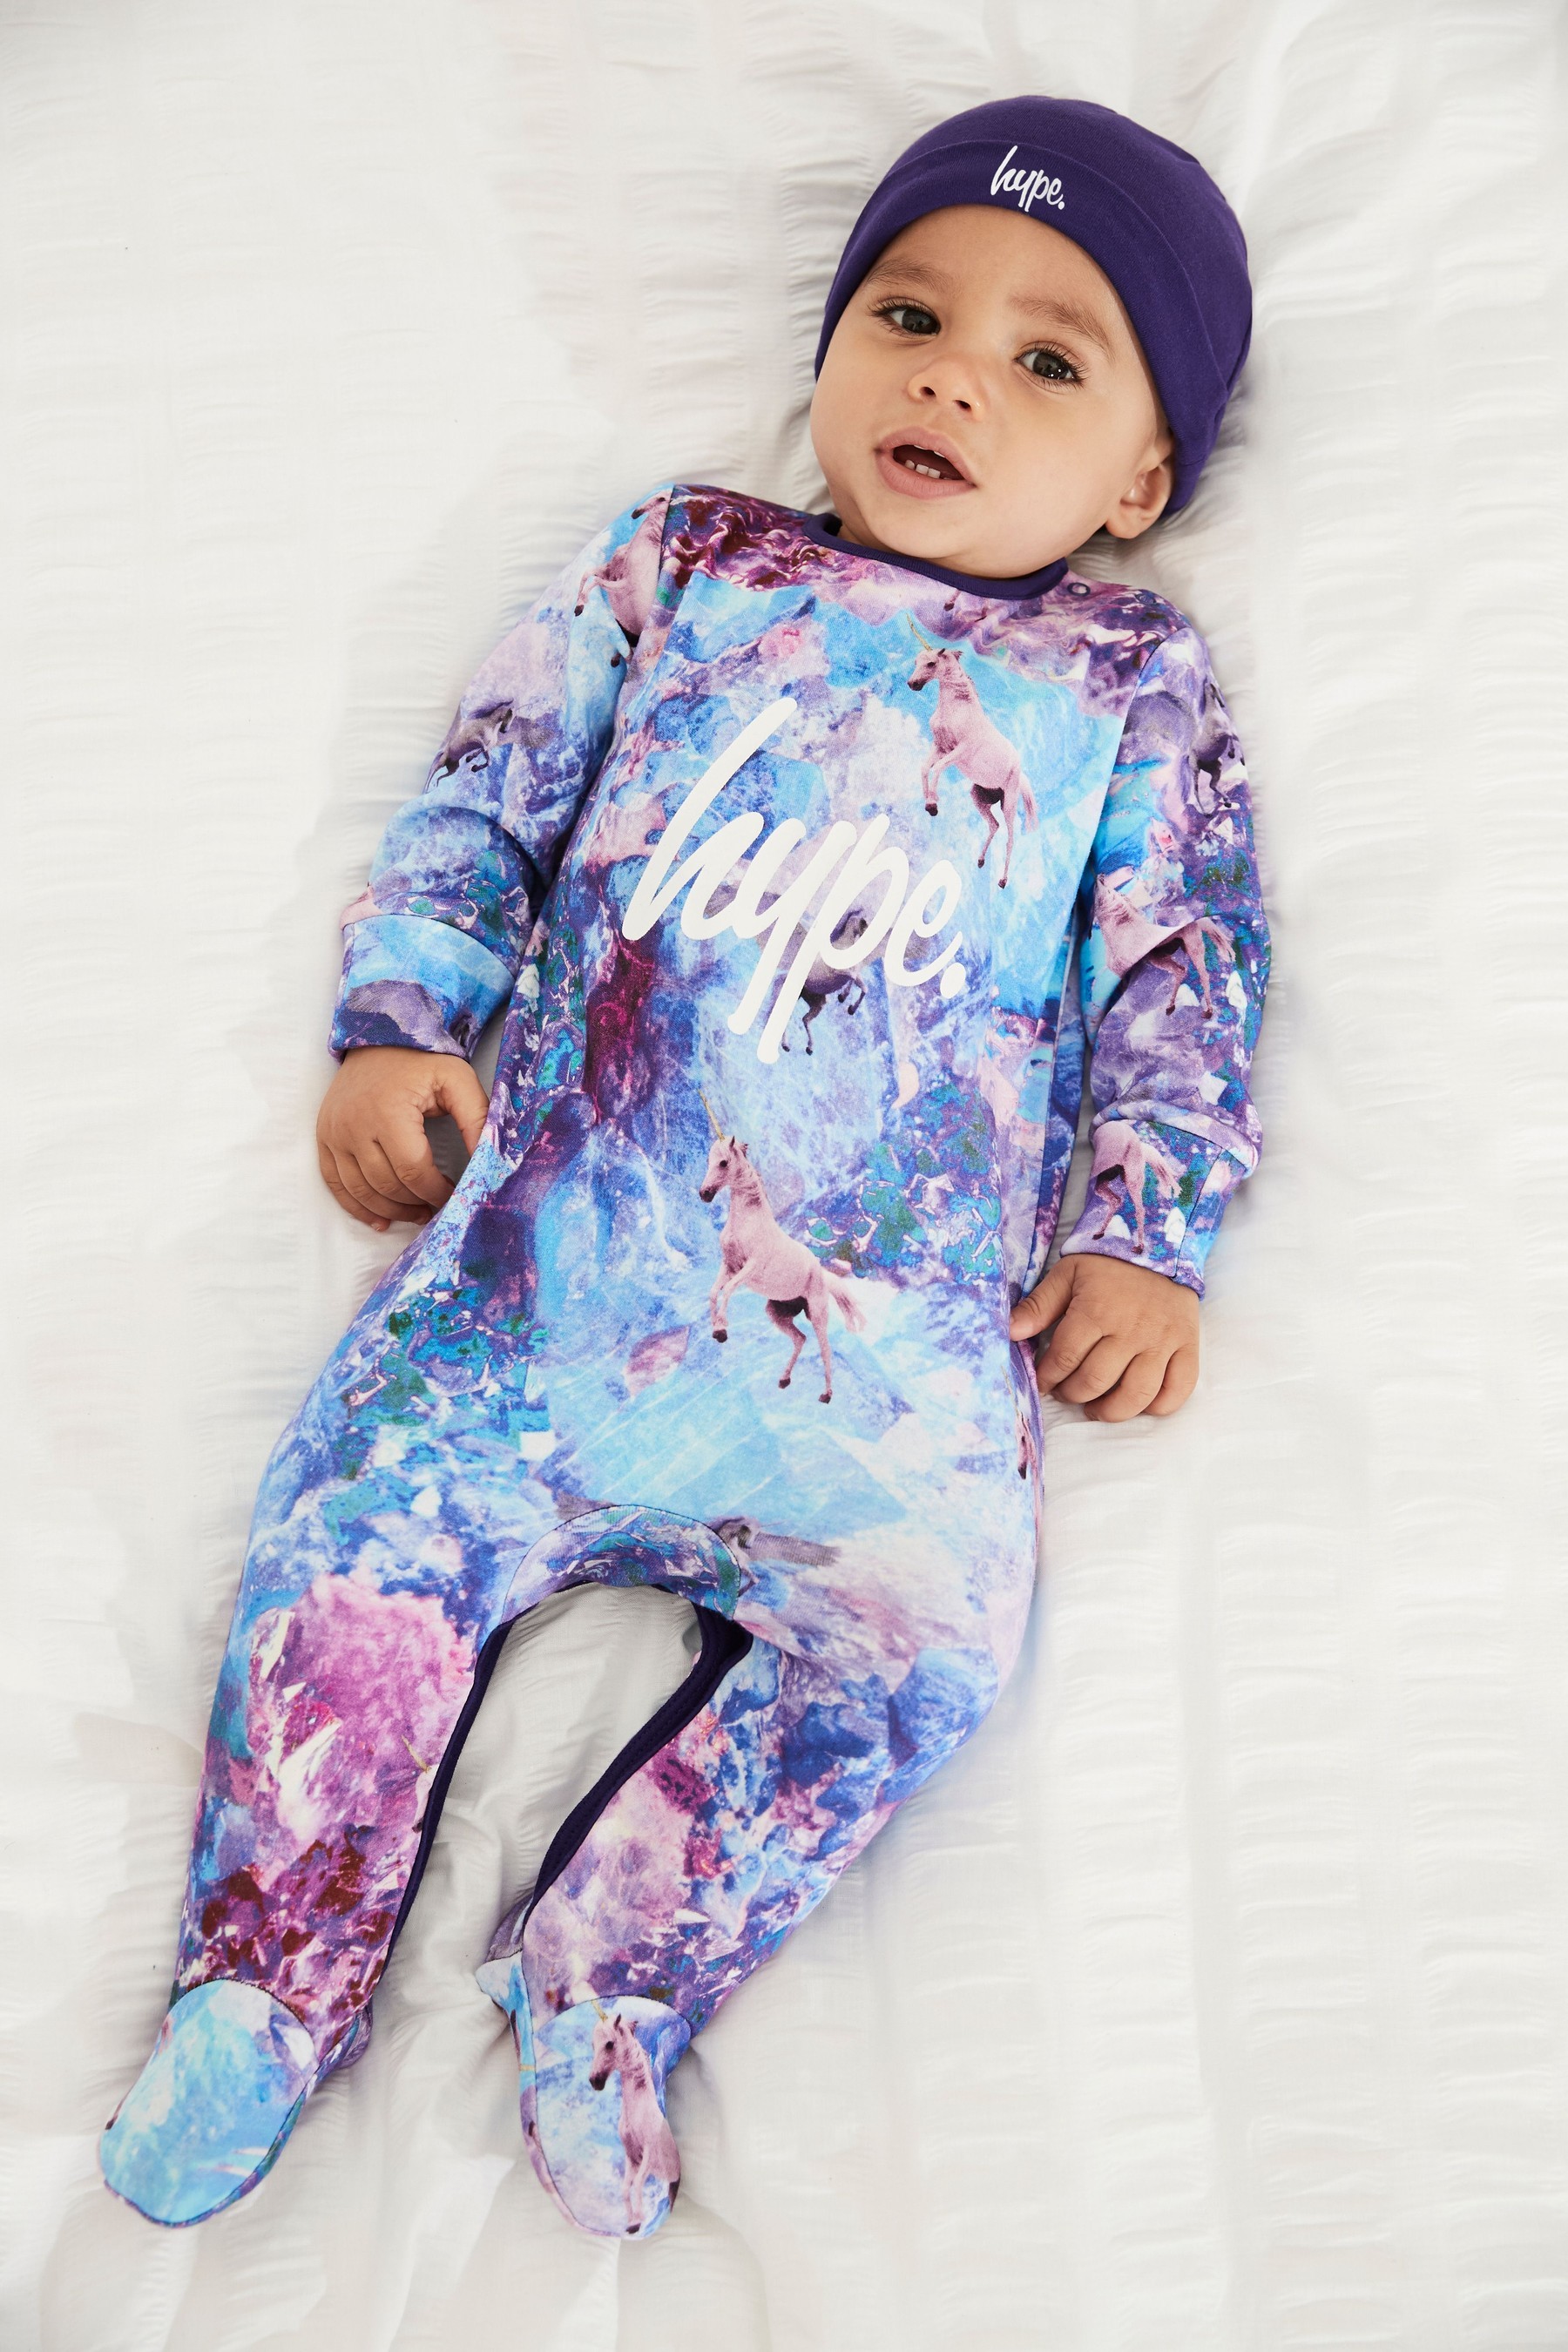 Hype. Baby Sleepsuit And Hat Set